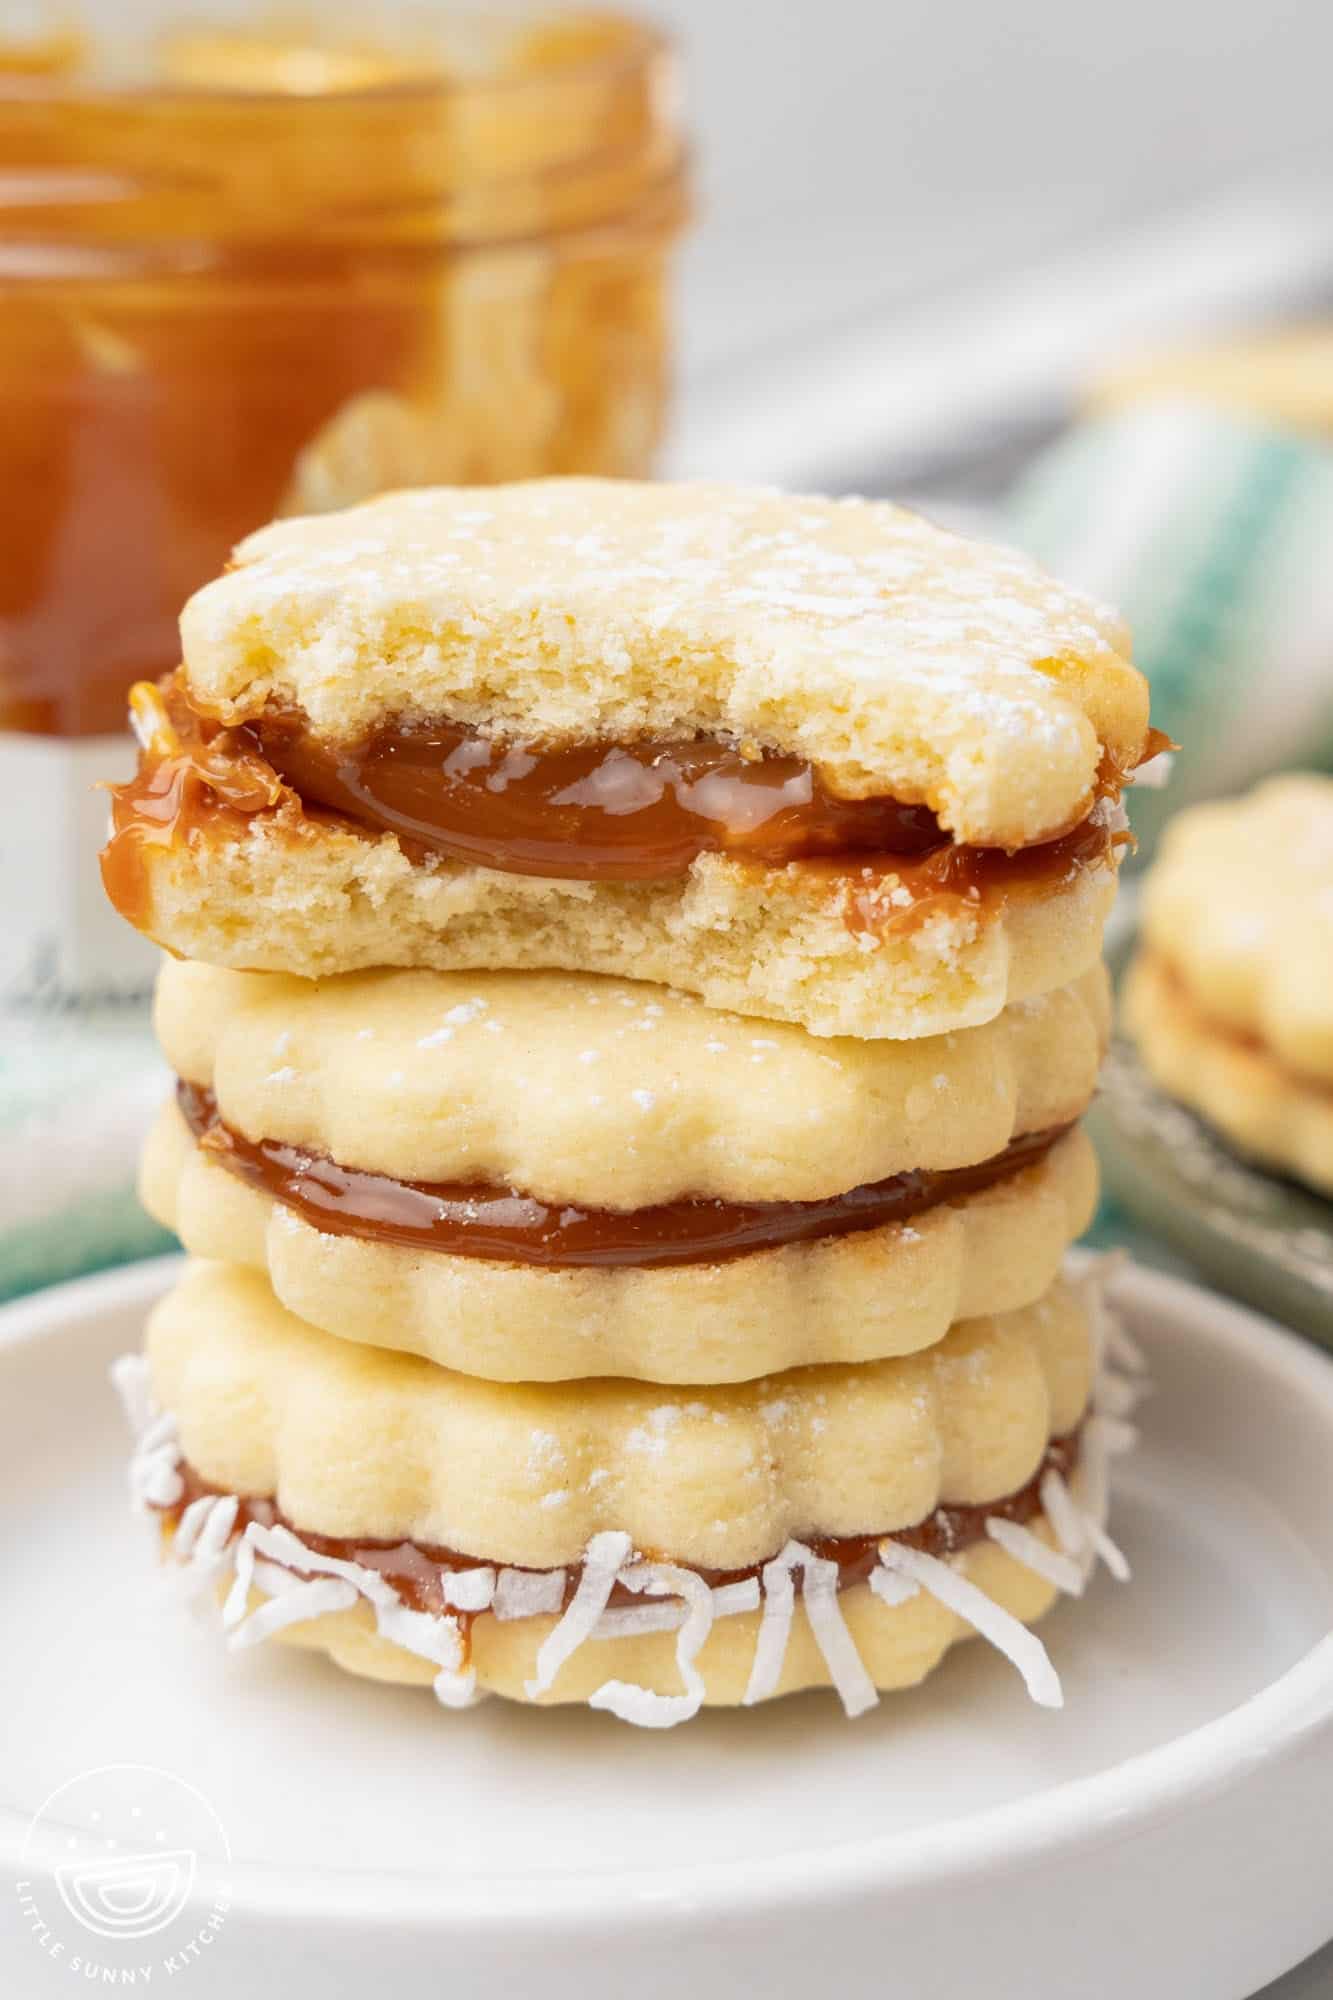 three alfajores cookies stacked. the top one has a bite taken to show the gooey dulce de leche inside